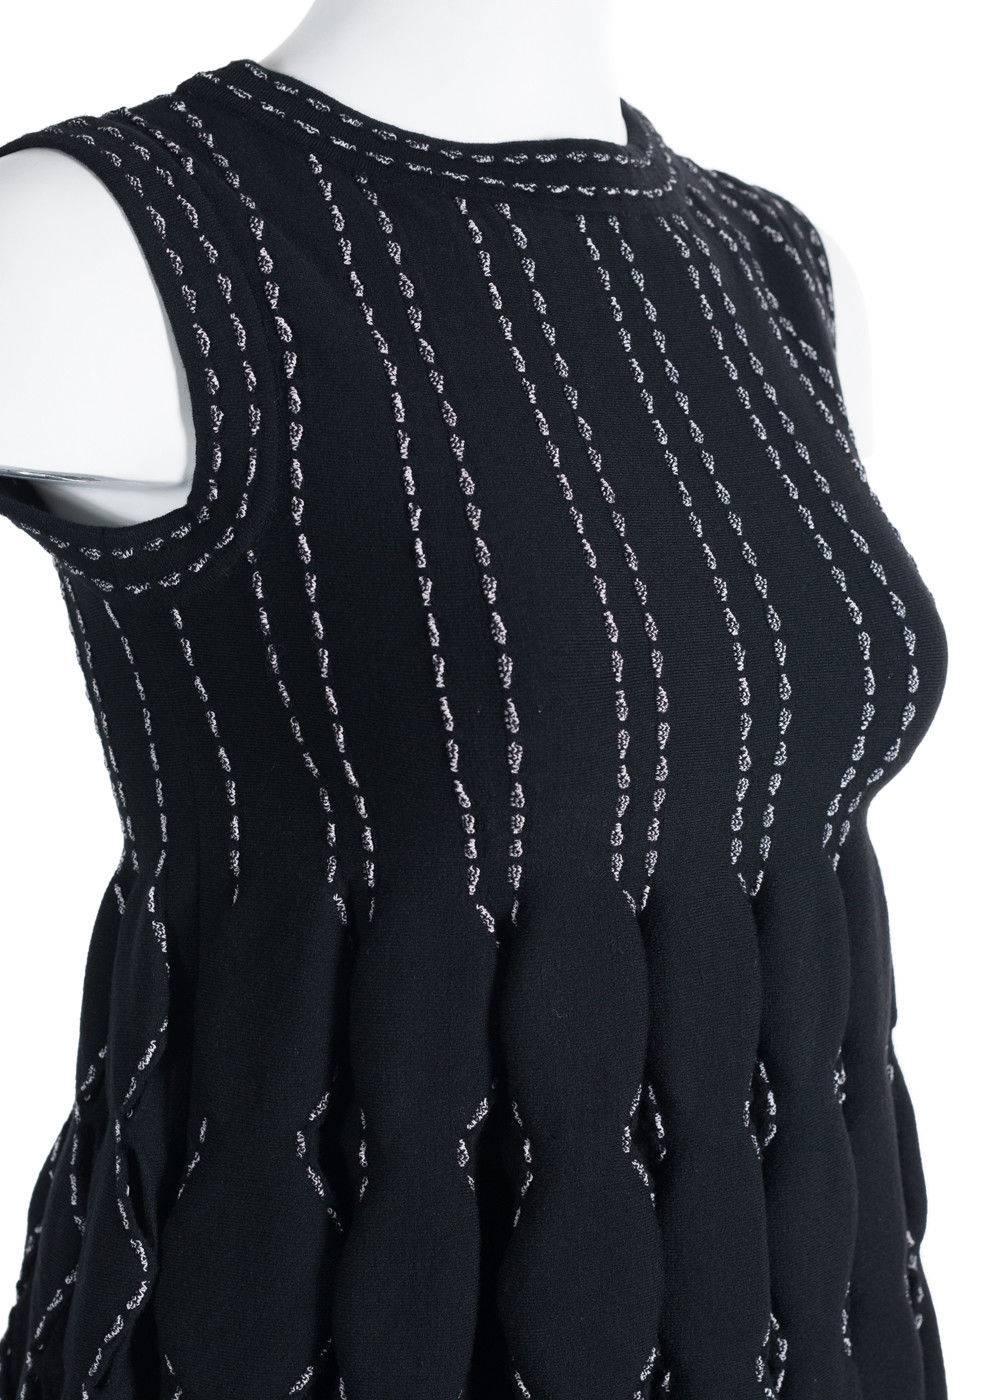 Alaia Women's Black Wool Blend Contrast Stitched Sleeveless Top In New Condition For Sale In Brooklyn, NY